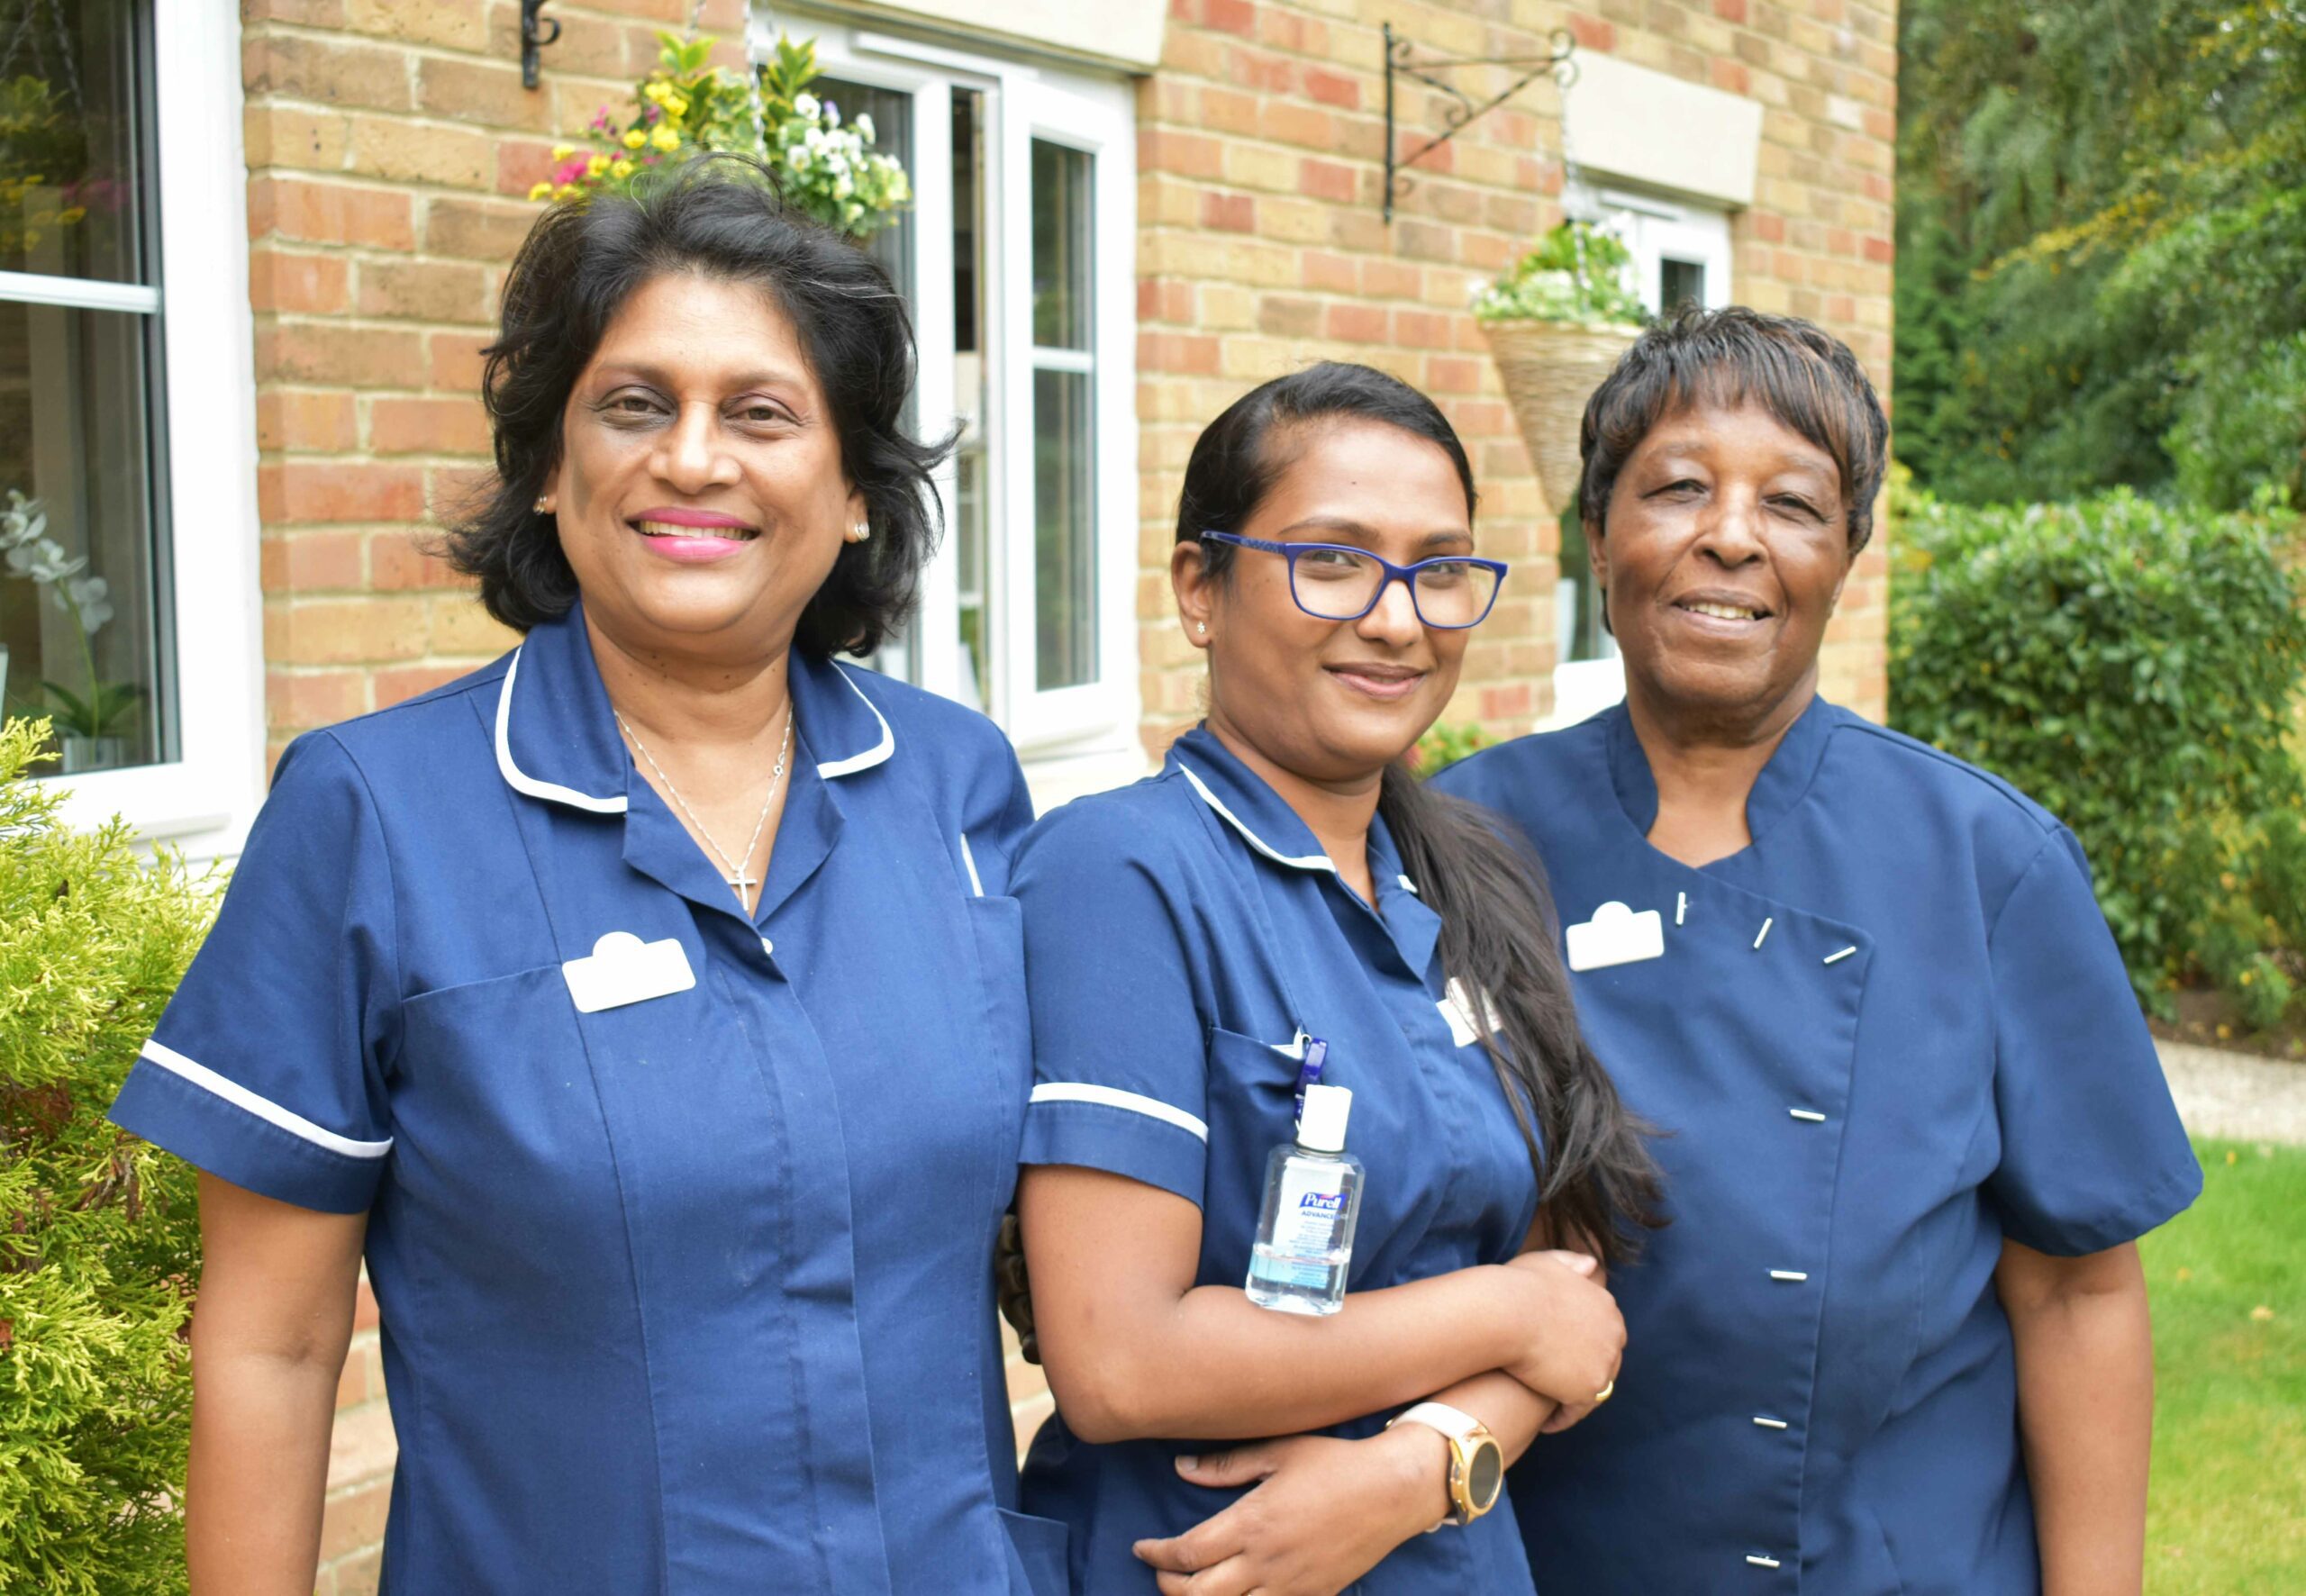 Person centered care in our care homes